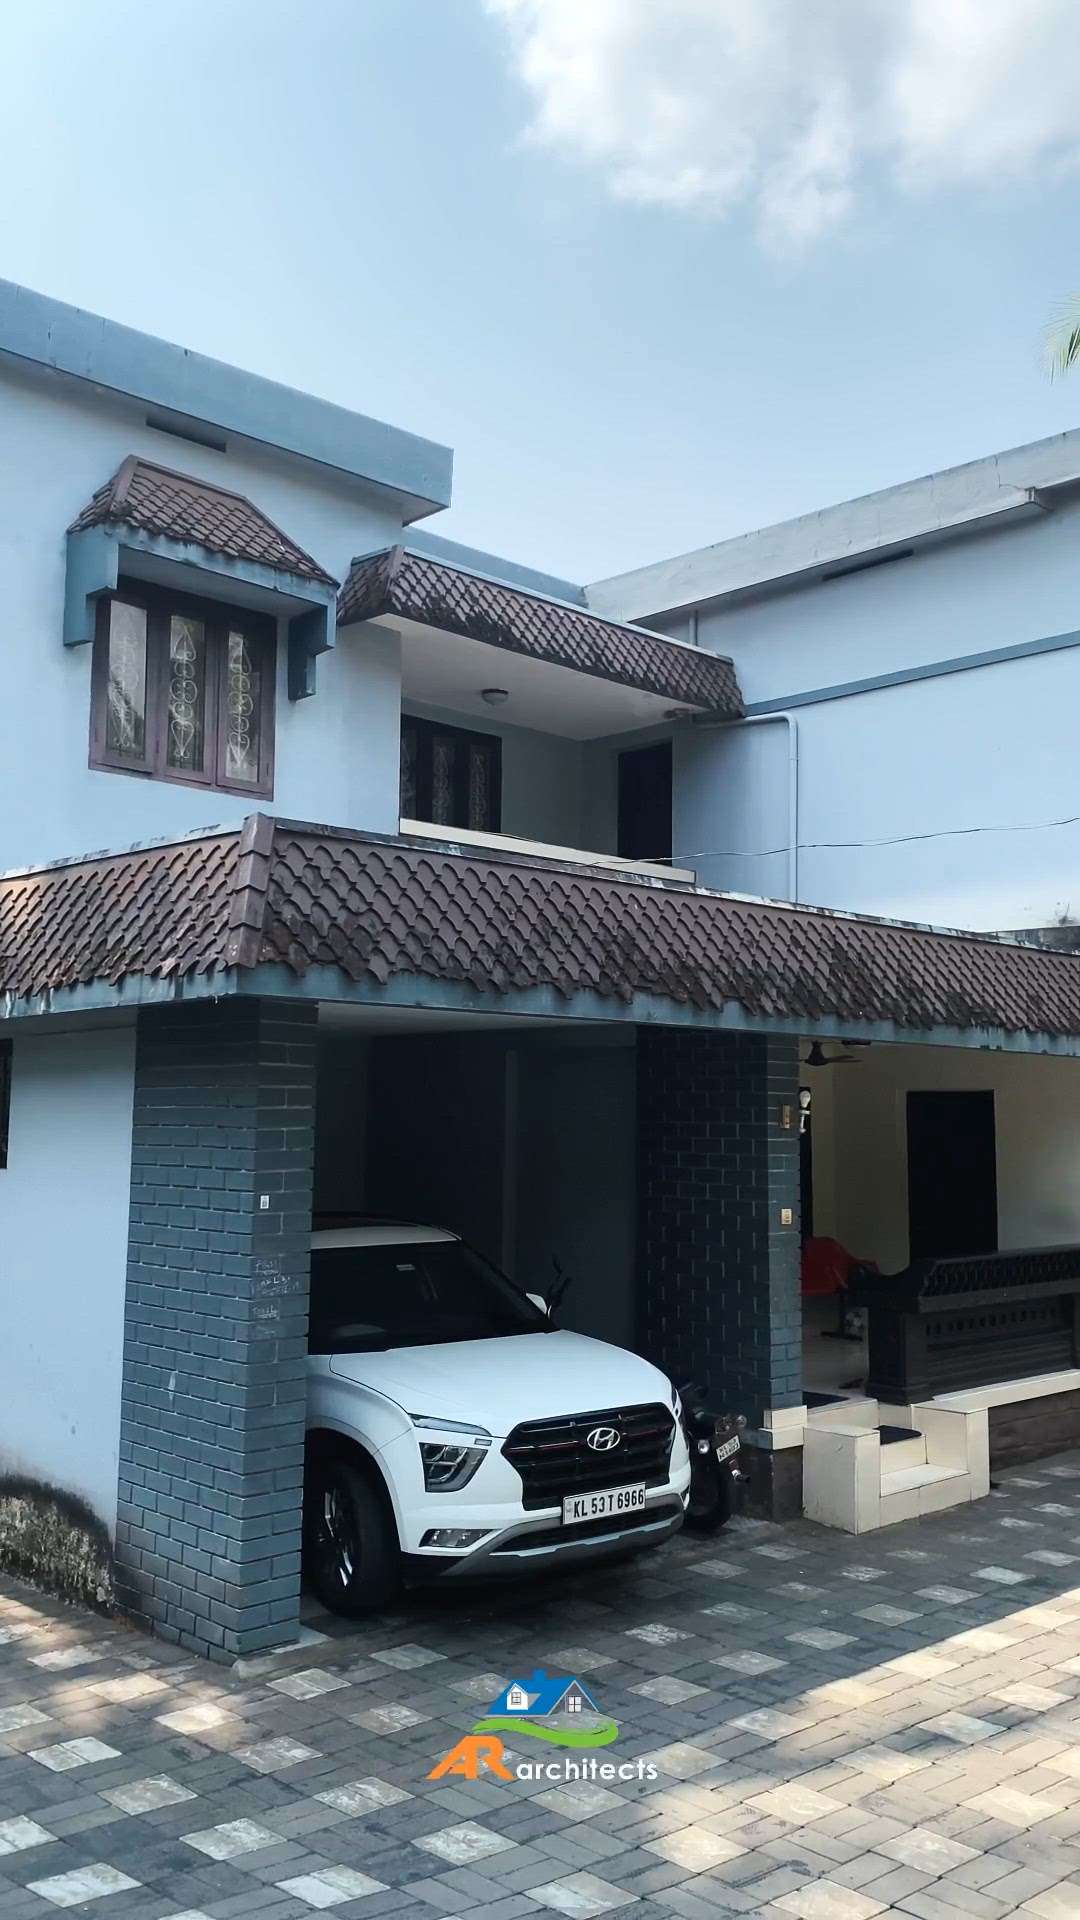 Area: 2400 sqft, 4 bedrooms
•
•
•
•
•
•
•
•
•
#ararchitects #homedesign #keralahomes #keralaarchitects 
#keralahomedesignz #keralahome #keralahomeplanners #architecture #exterior 
#keralahomestyle #archdaily #kerala #renovation #indiahomedecor #homedecor #renovations #reelsvideo